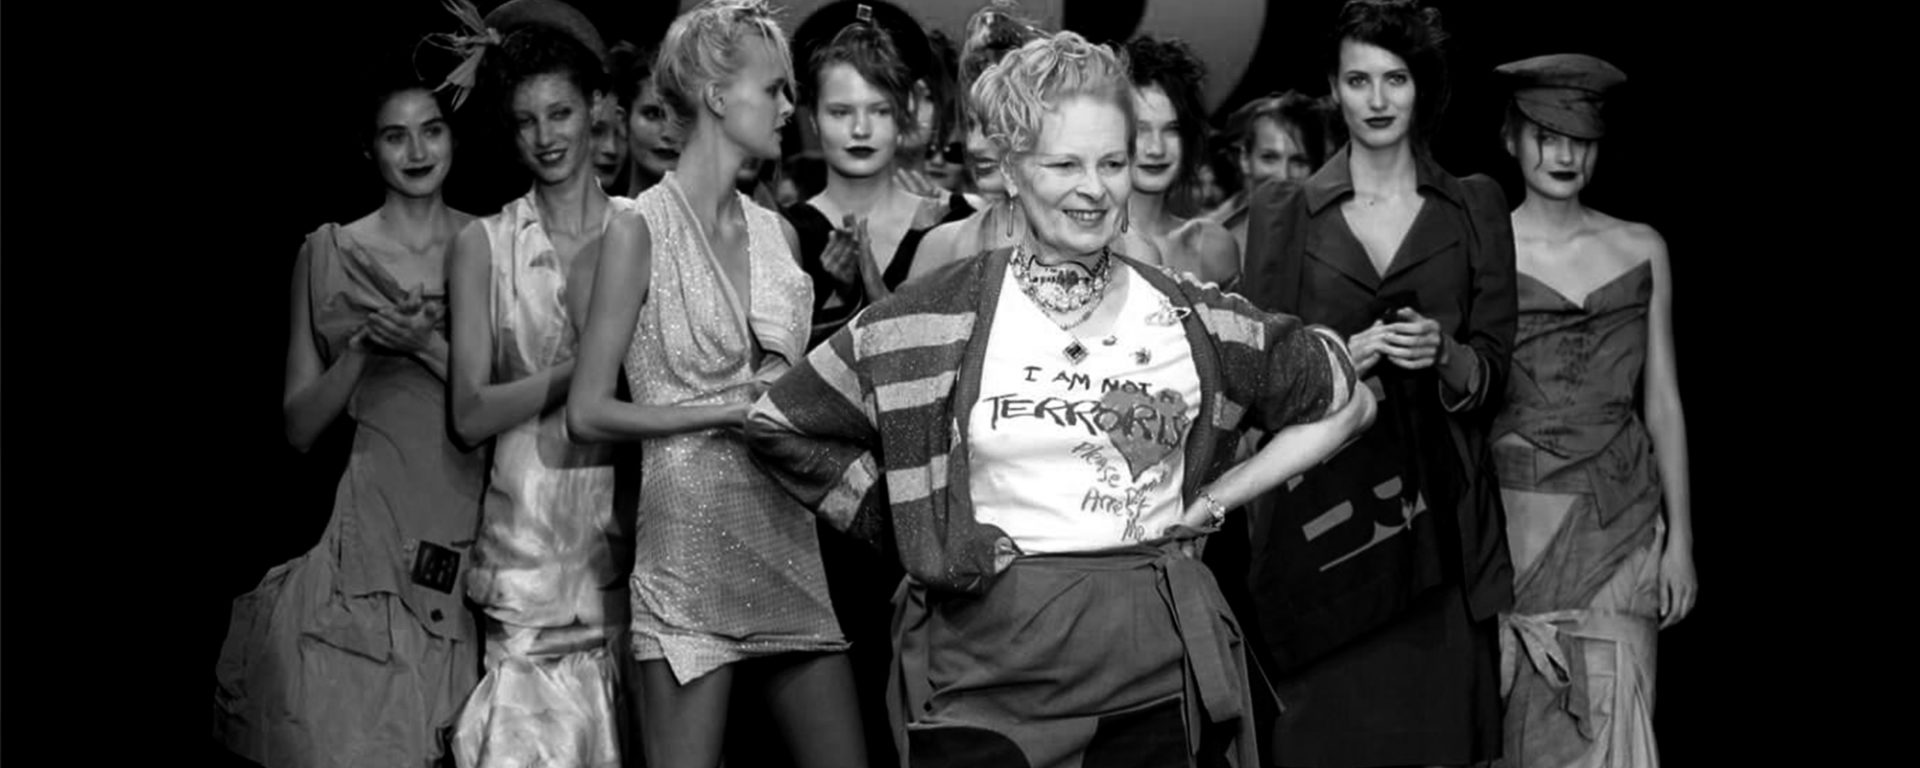 From the Archives: Punk Fashion in Vogue